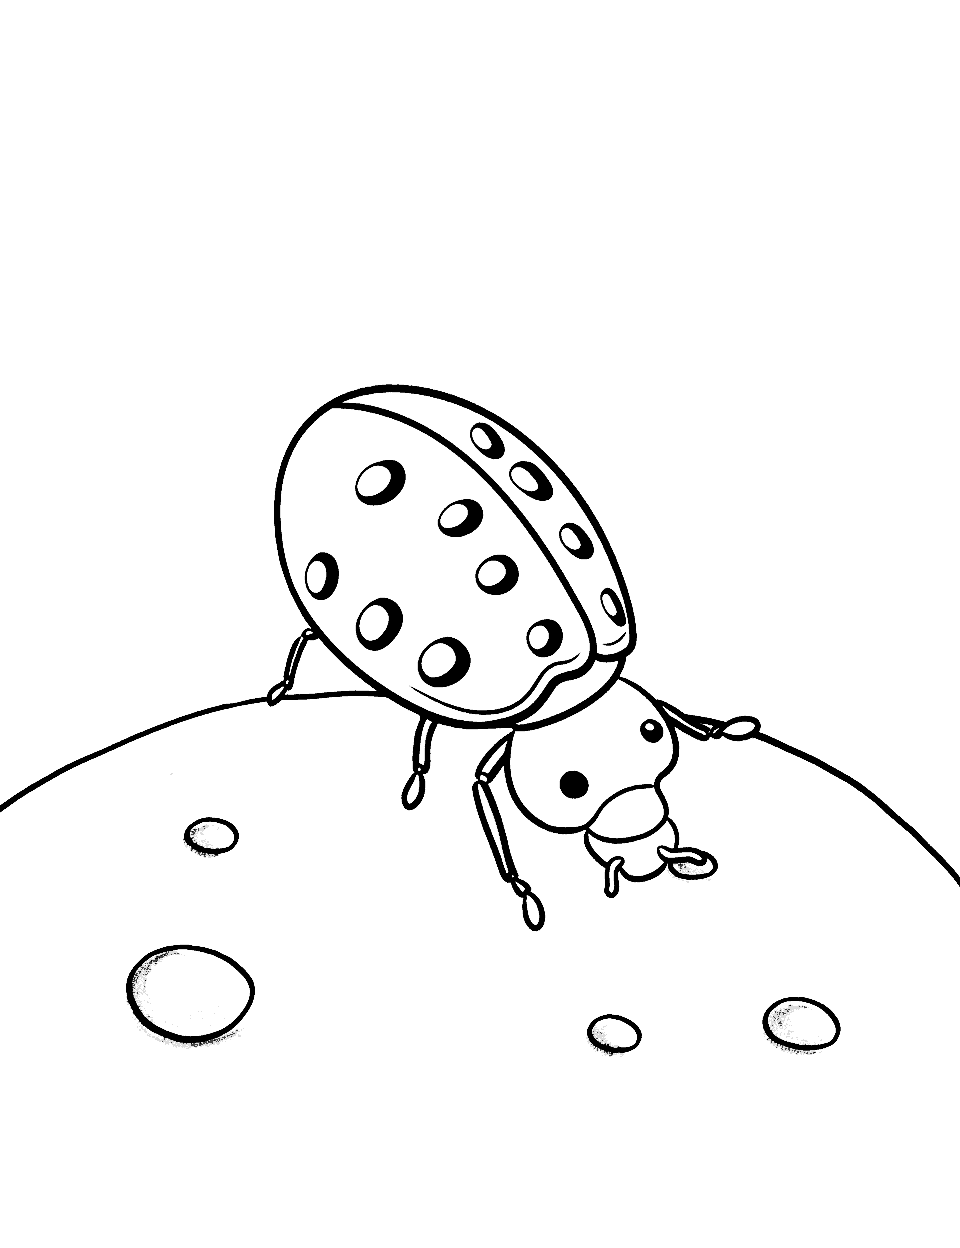 Exploring Ladybird Coloring Page - A curious ladybird wandering over a pebble.